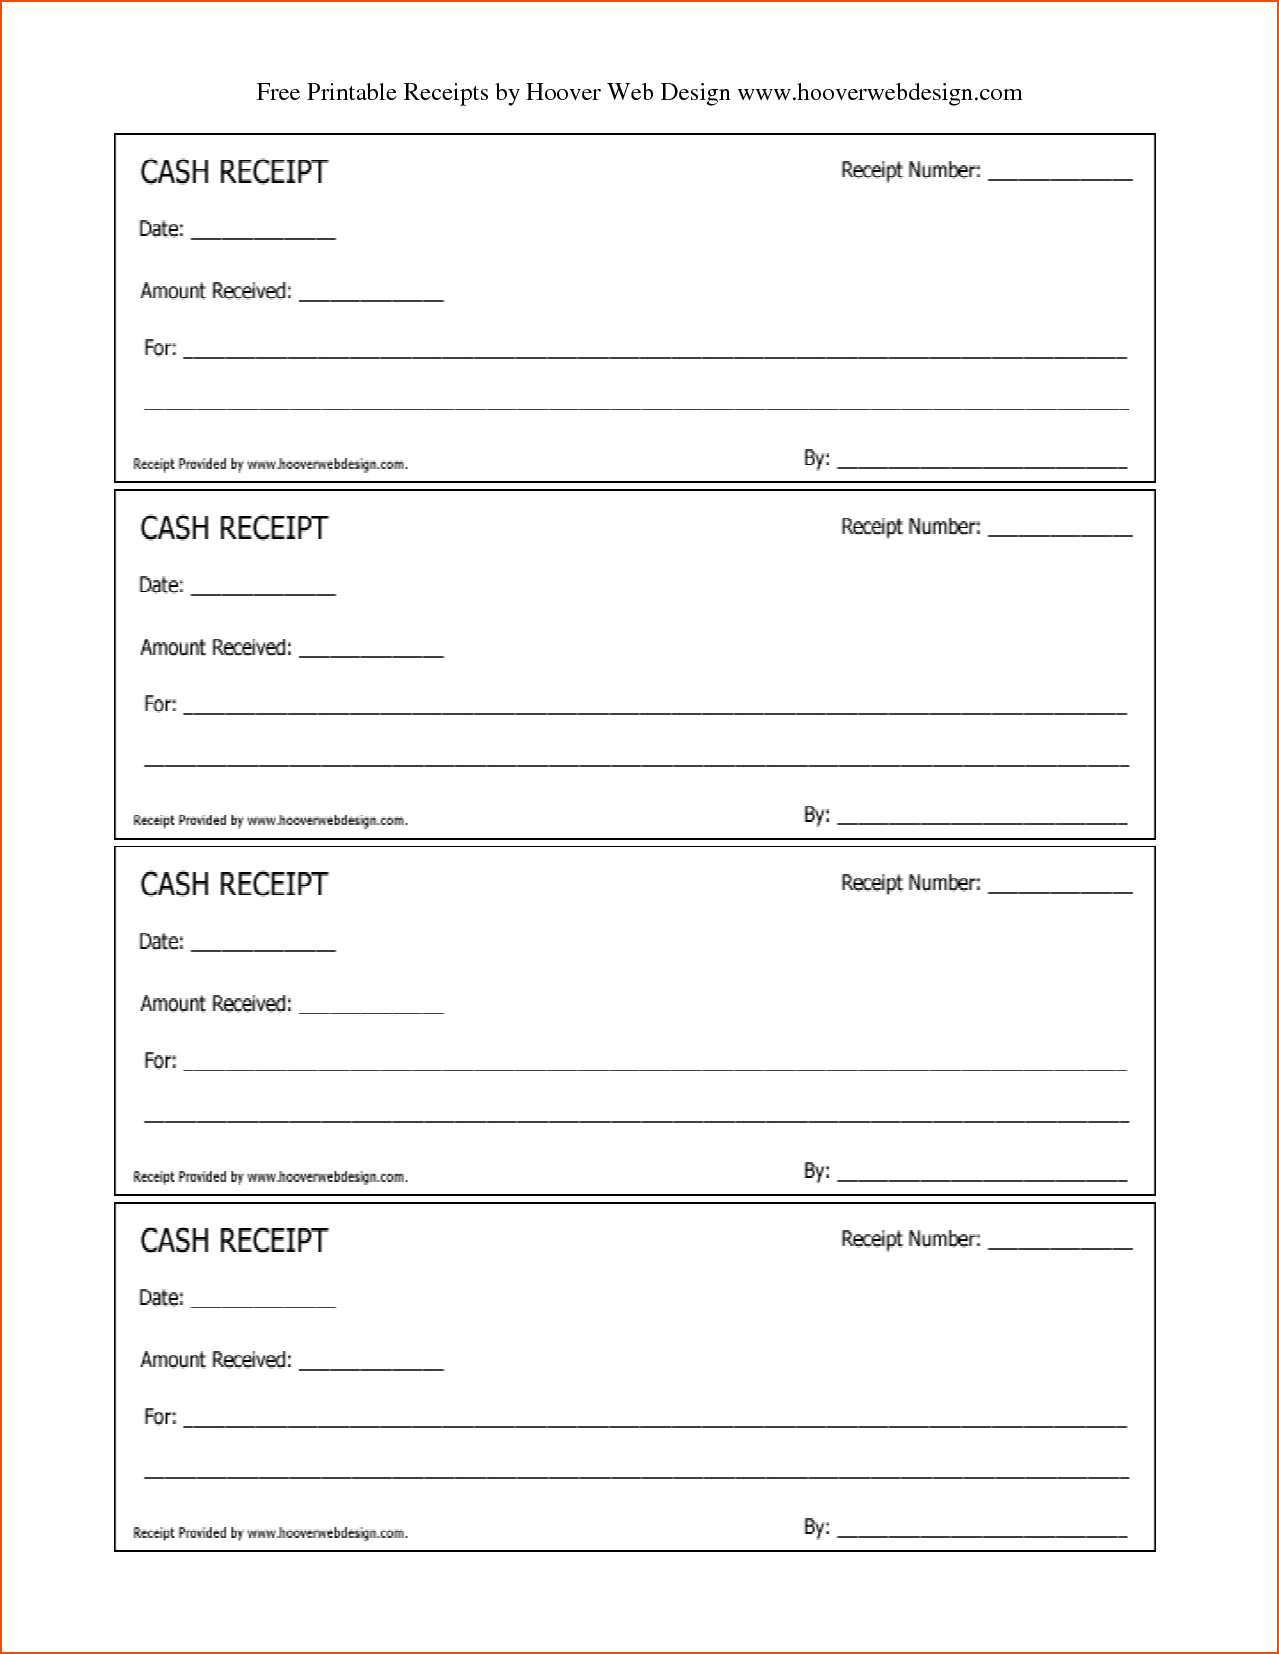 Free Printable Receipts For Services Feedback Templates